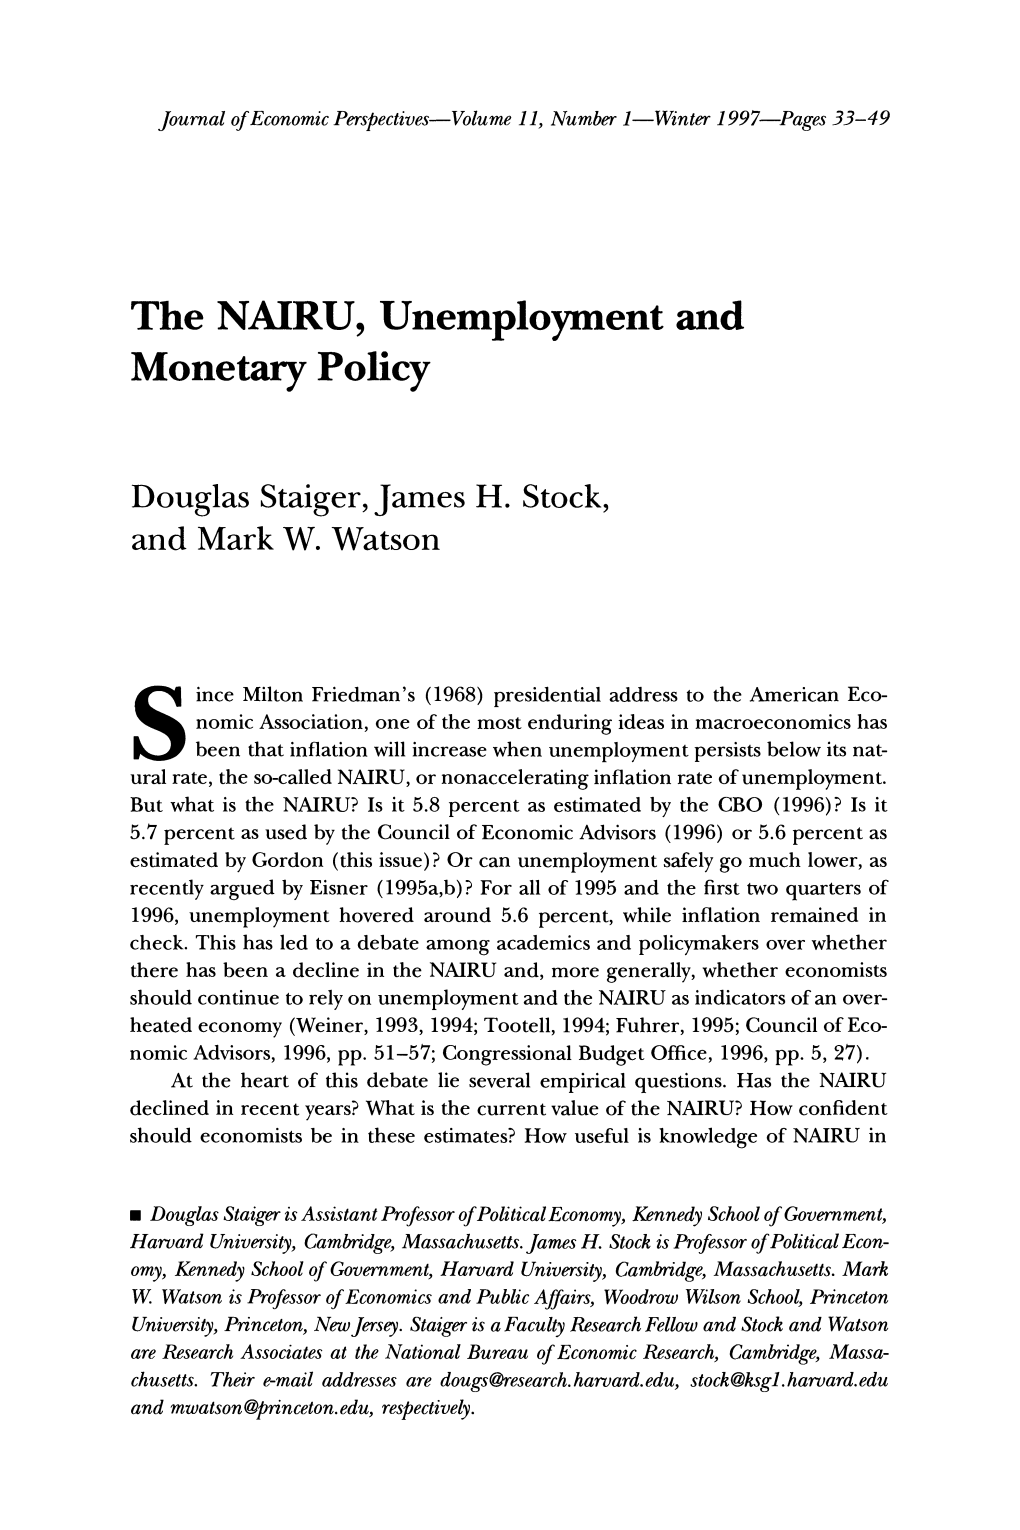 The NAIRU, Unemployment and Monetary Policy